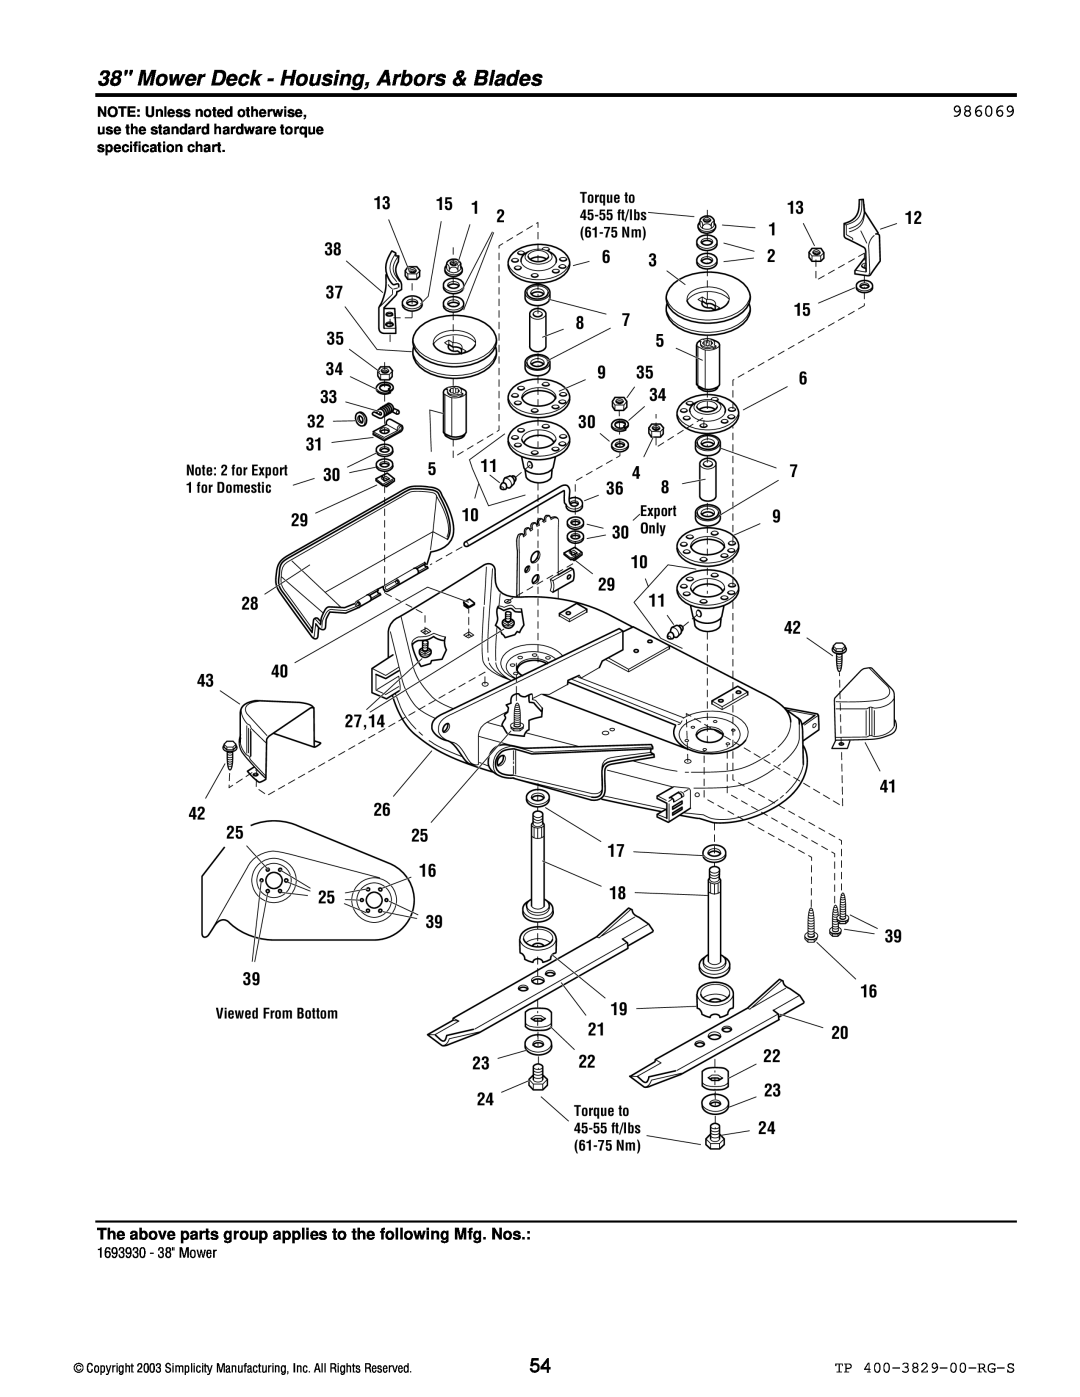 Simplicity 1693920 Mower Deck - Housing, Arbors & Blades, 986069, TP 400-3829-00-RG-S, NOTE Unless noted otherwise, Only 